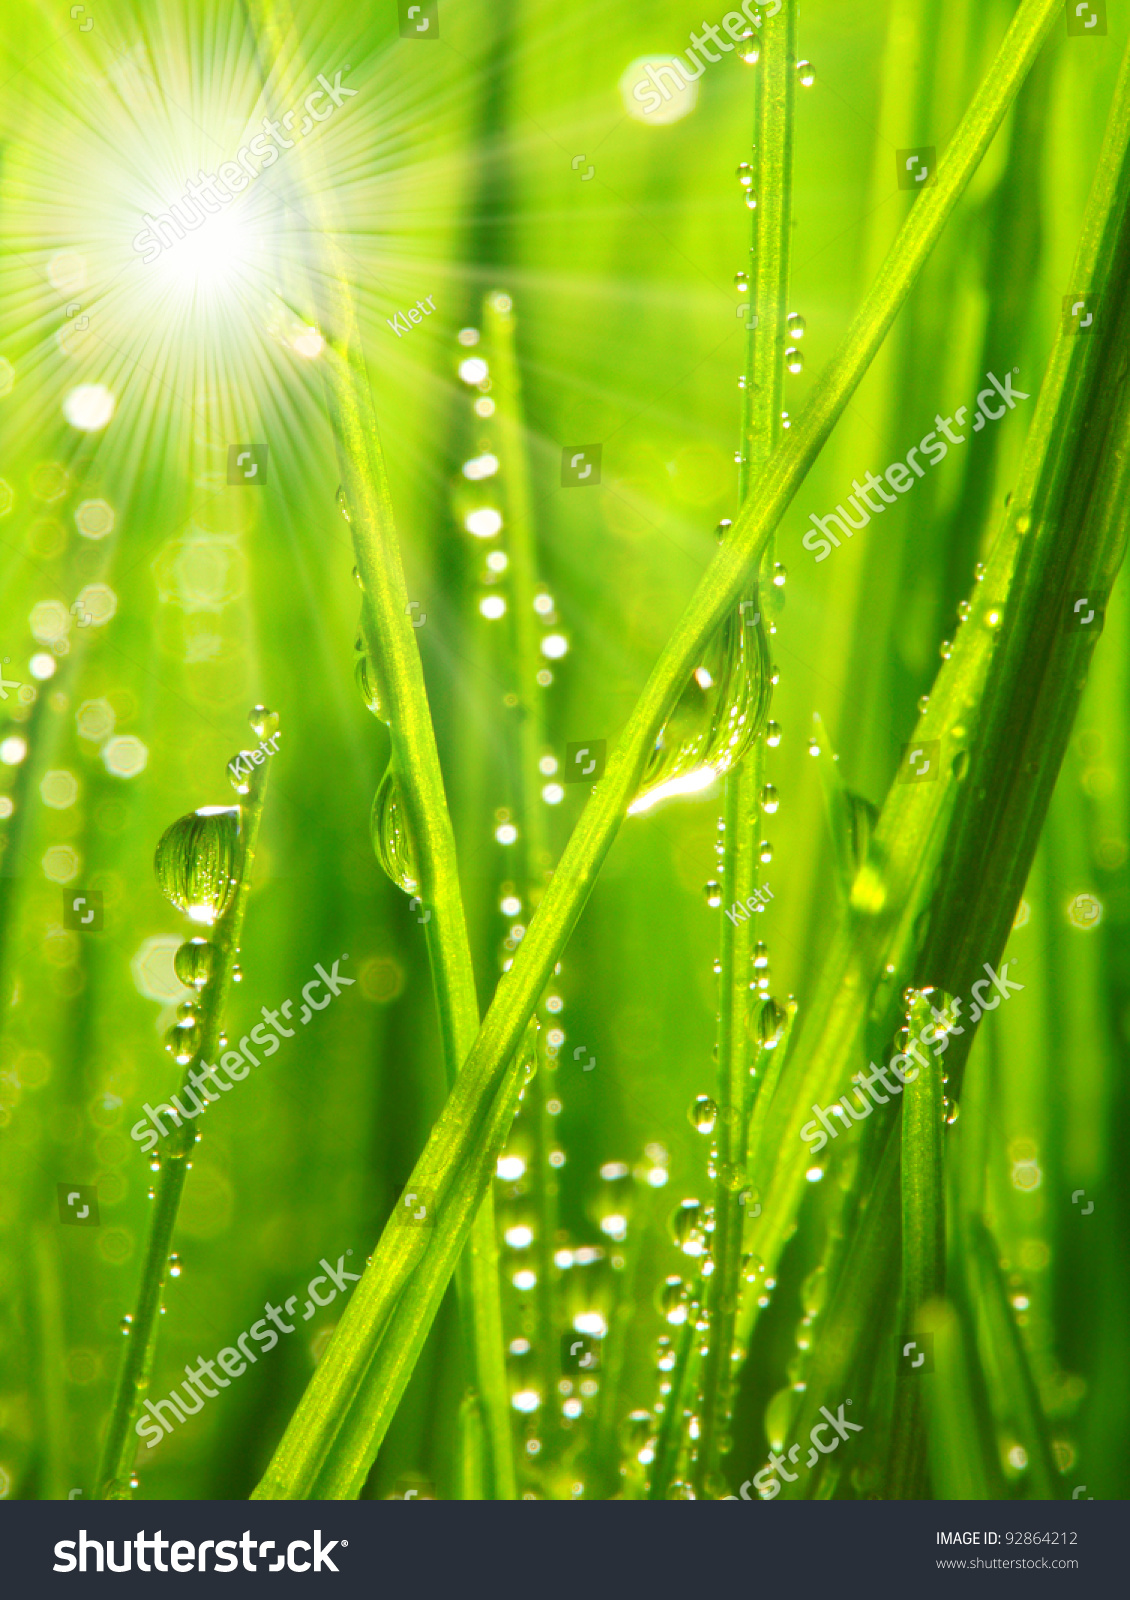 Sunrise And Fresh Dewy Grass. Sunny Day Concept. Stock Photo 92864212